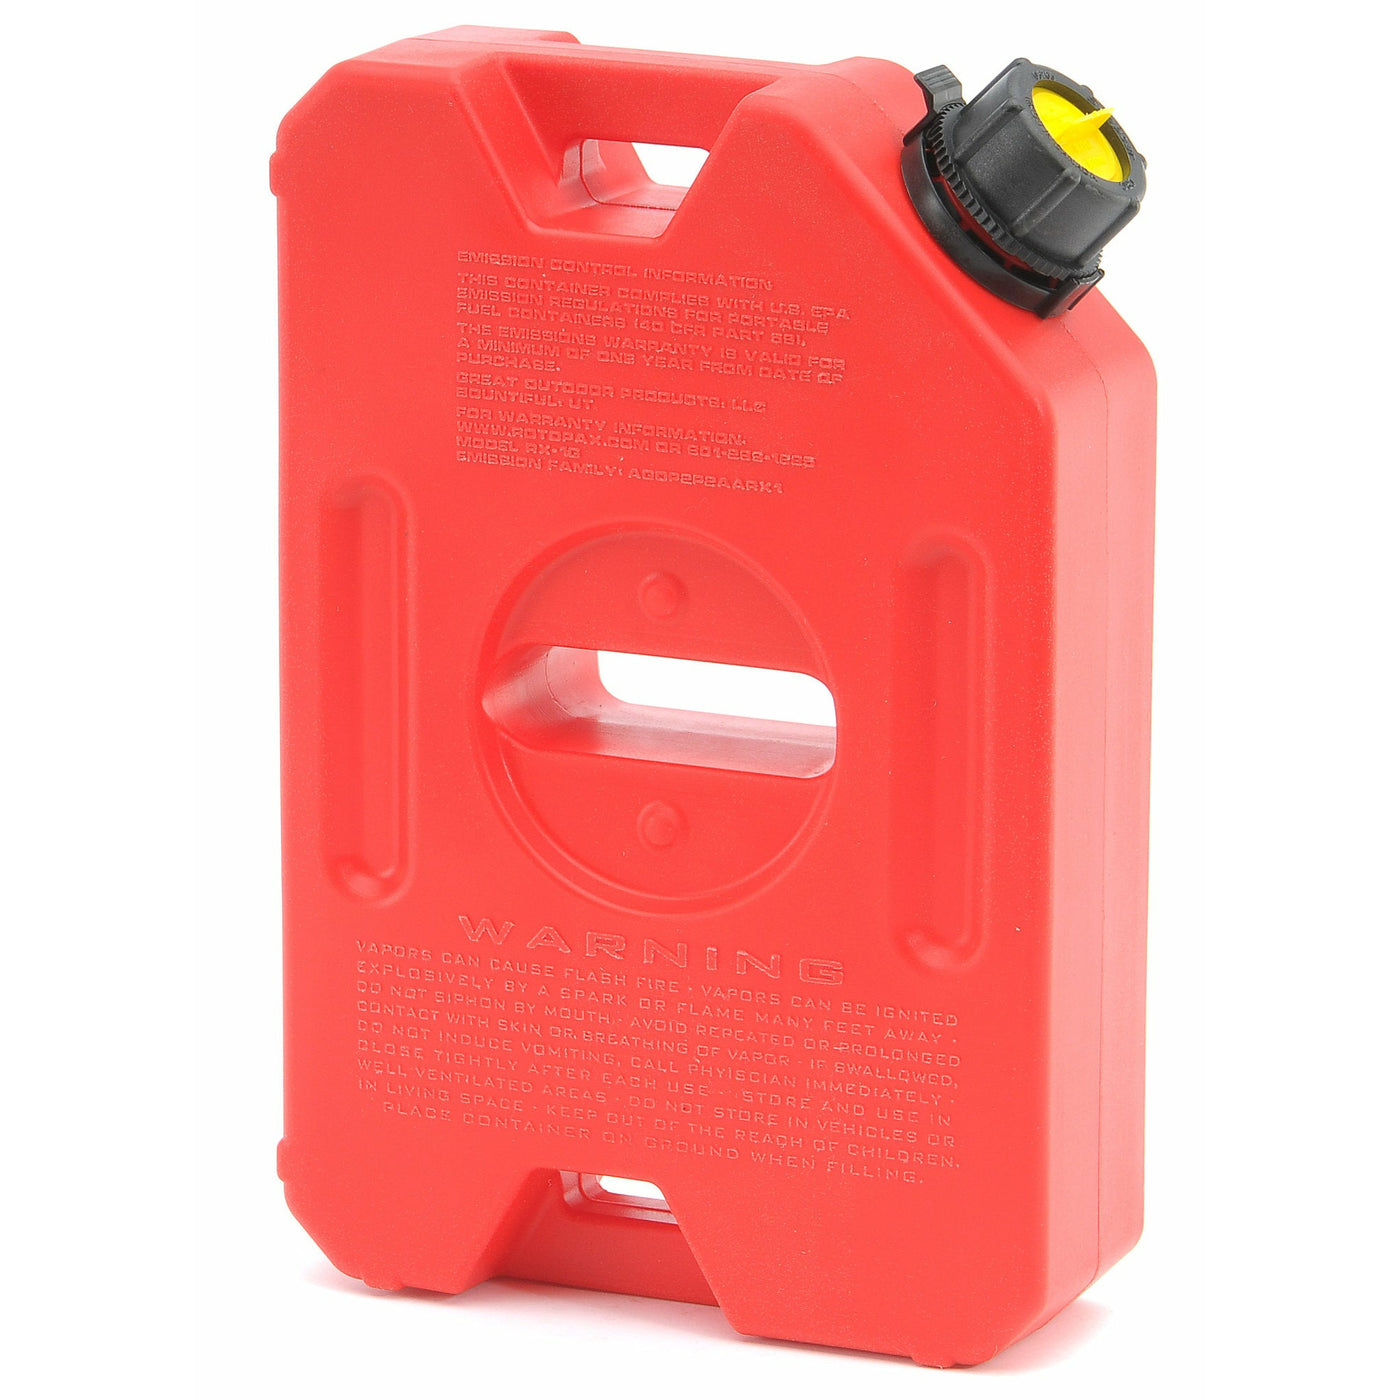 RotopaX 1-3 Gallon Red Fuel Can